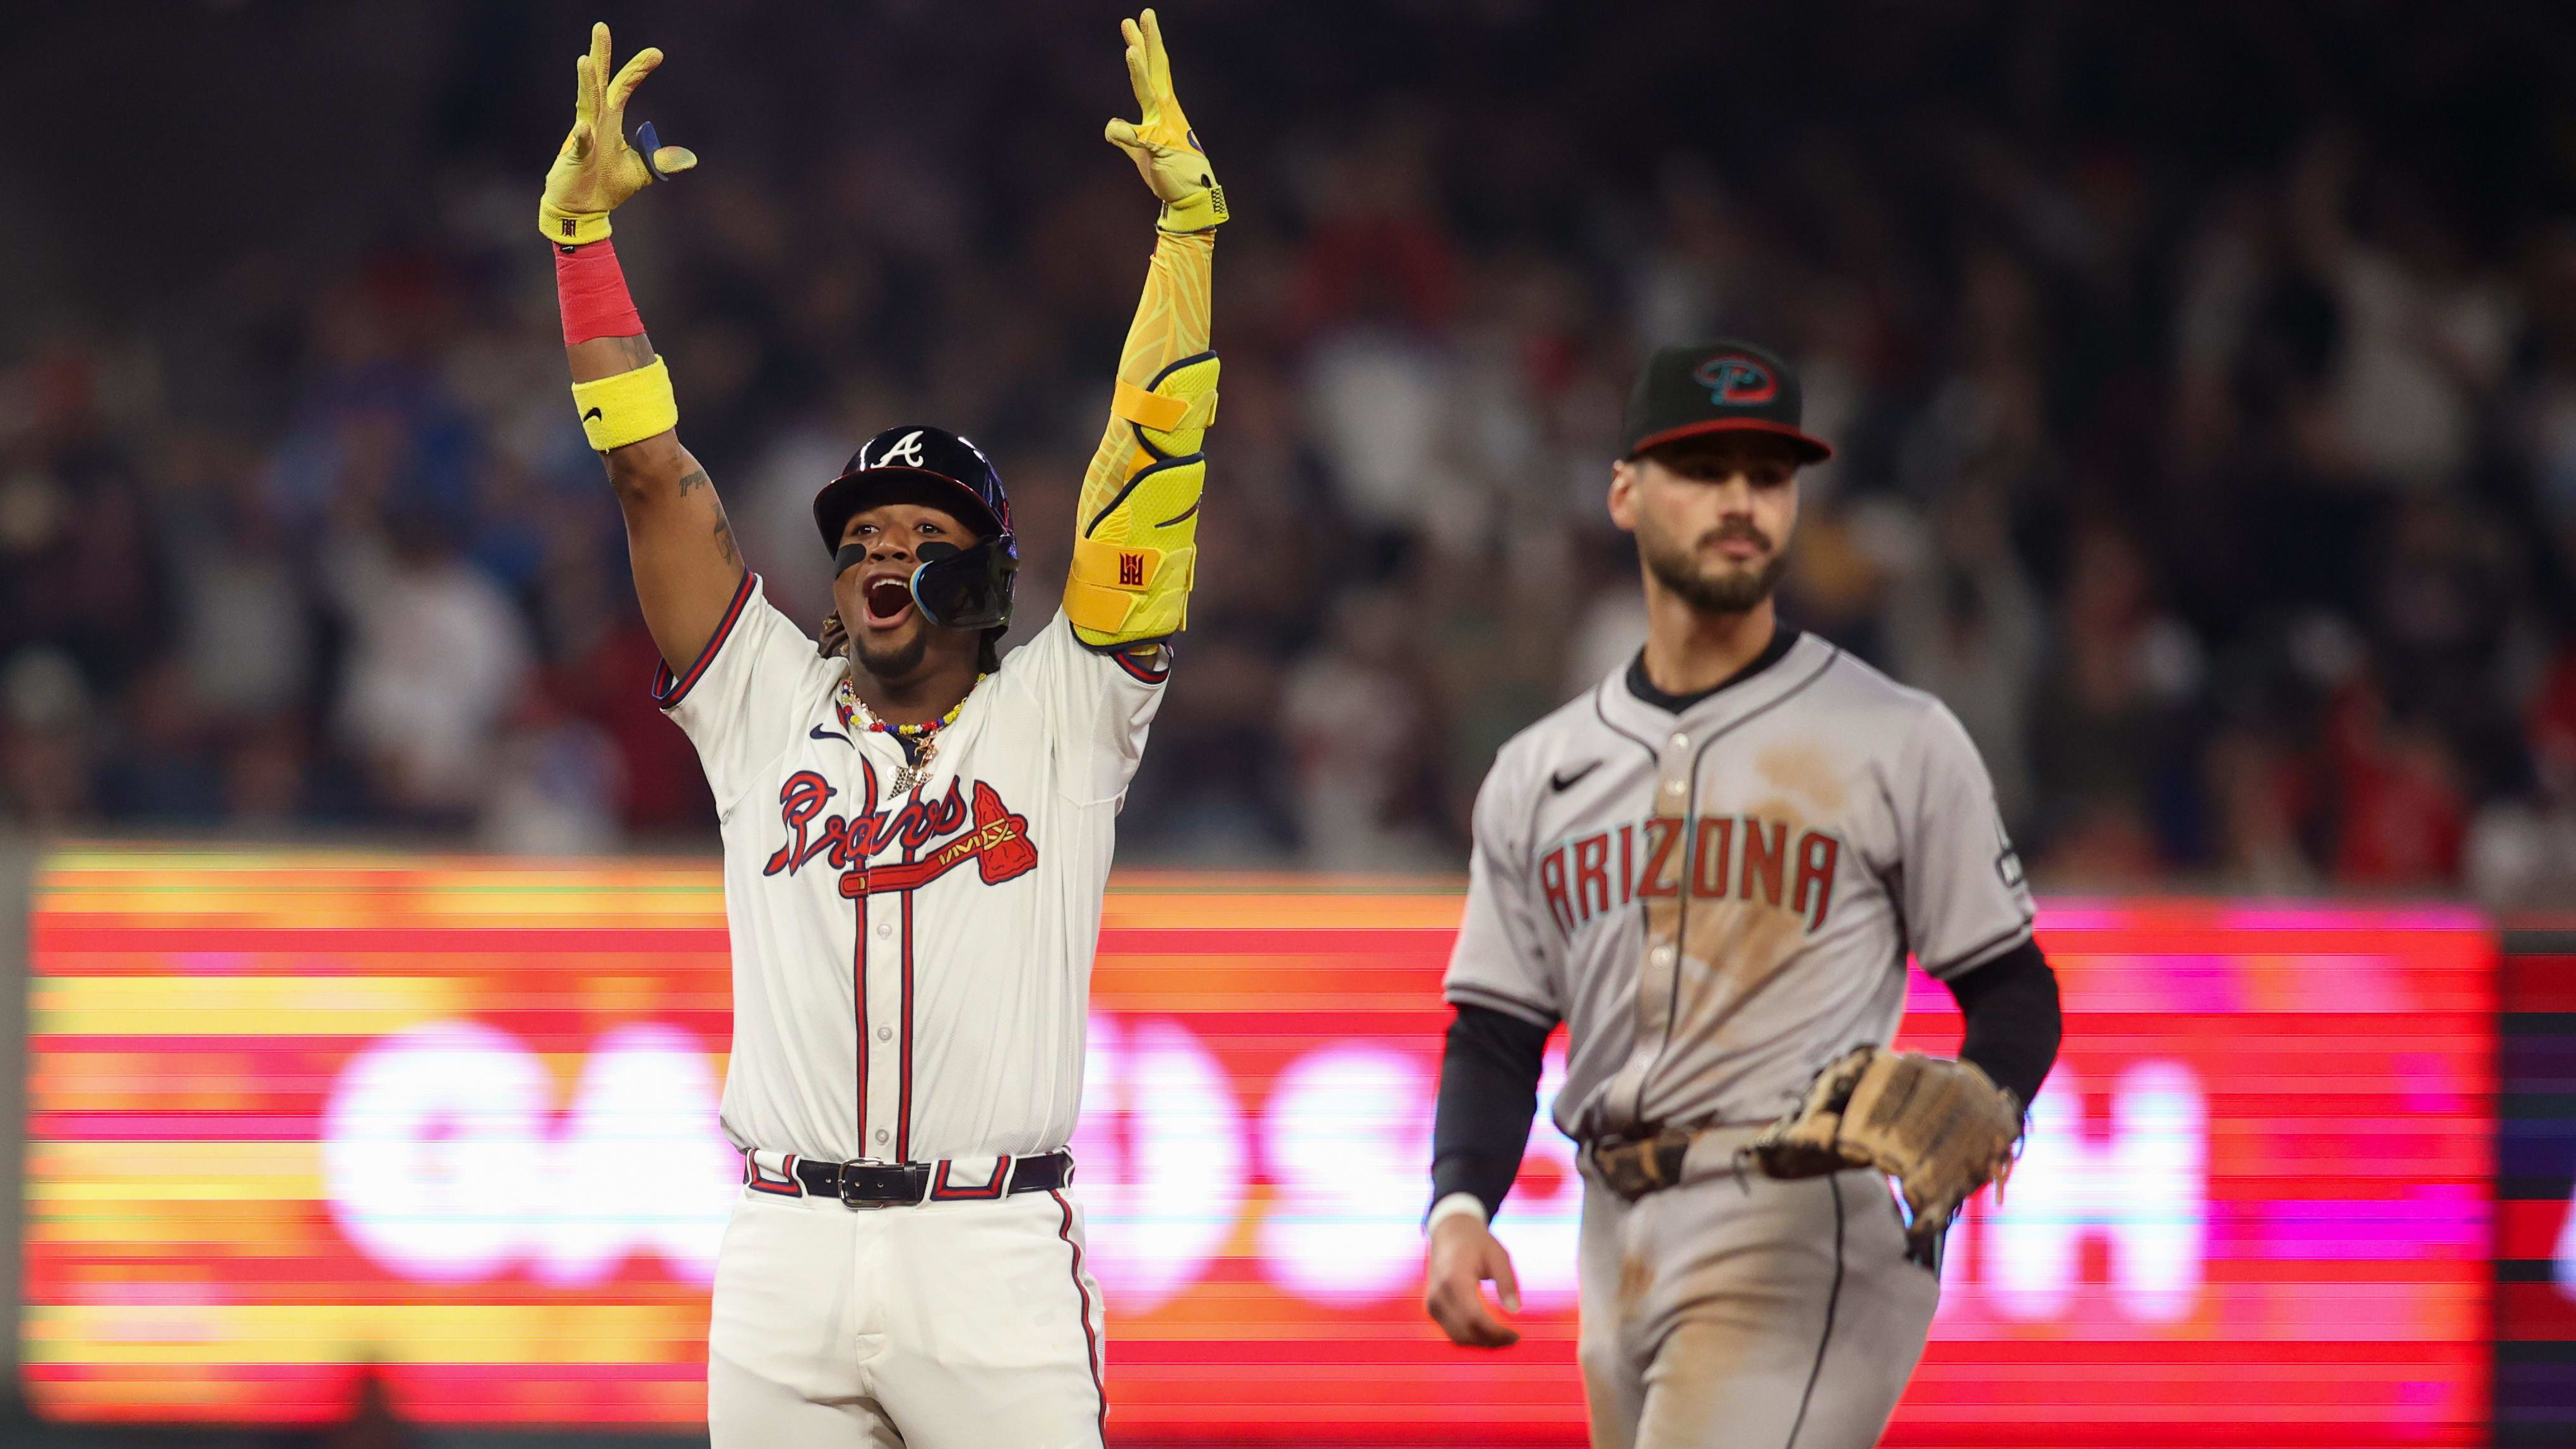 Atlanta Braves right fielder Ronald Acuna Jr. (13) celebrates after hitting a game-tying single in the 8th inning.